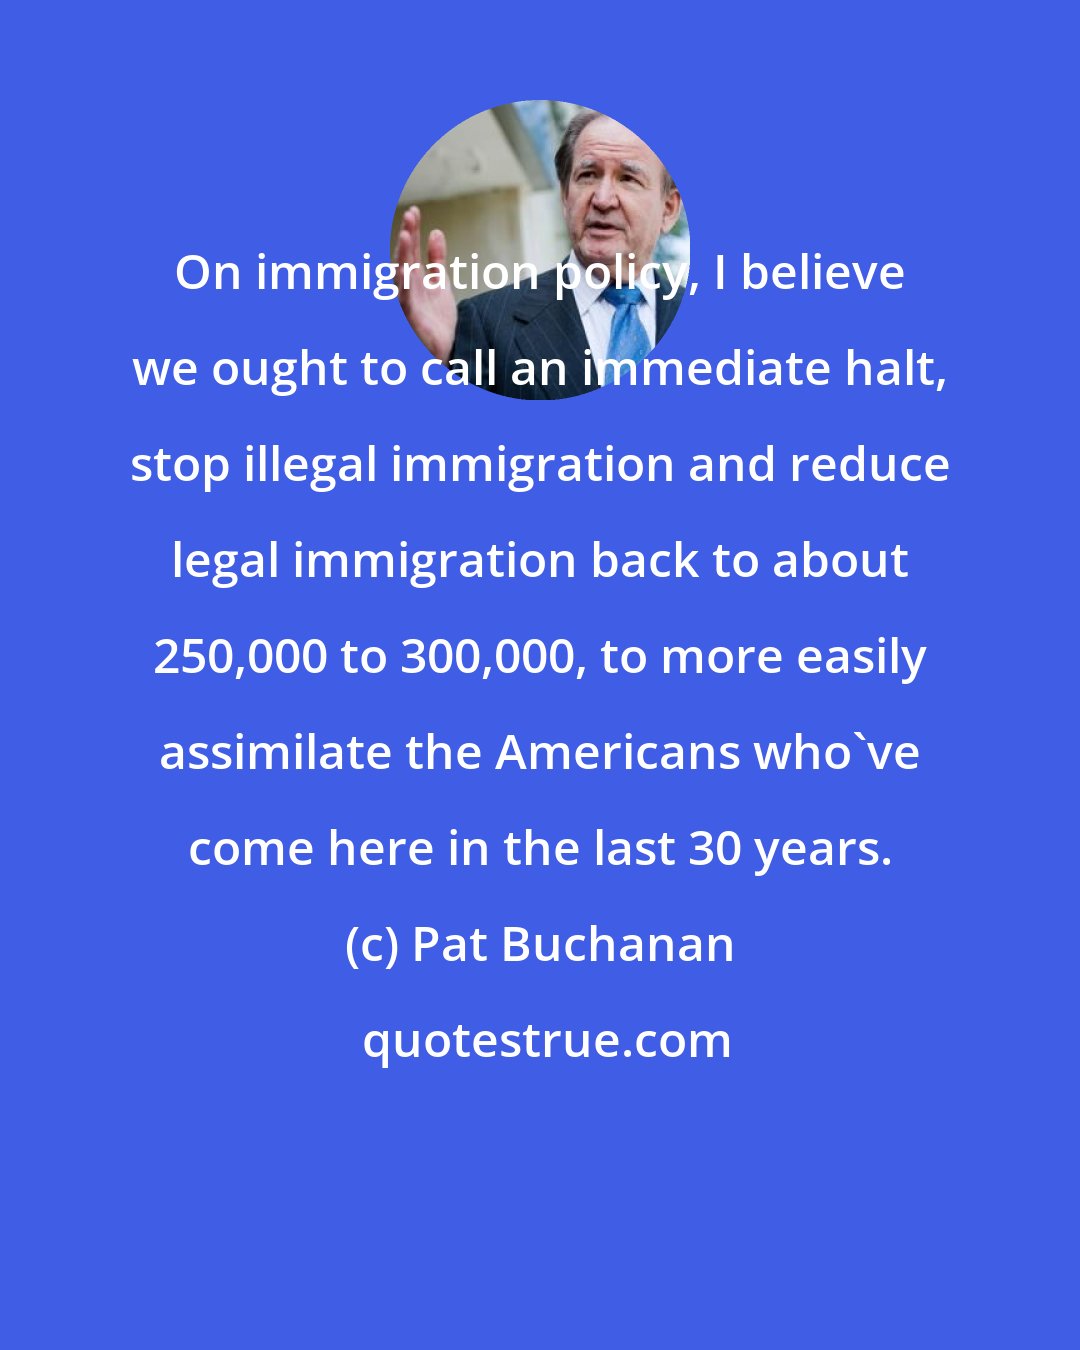 Pat Buchanan: On immigration policy, I believe we ought to call an immediate halt, stop illegal immigration and reduce legal immigration back to about 250,000 to 300,000, to more easily assimilate the Americans who've come here in the last 30 years.